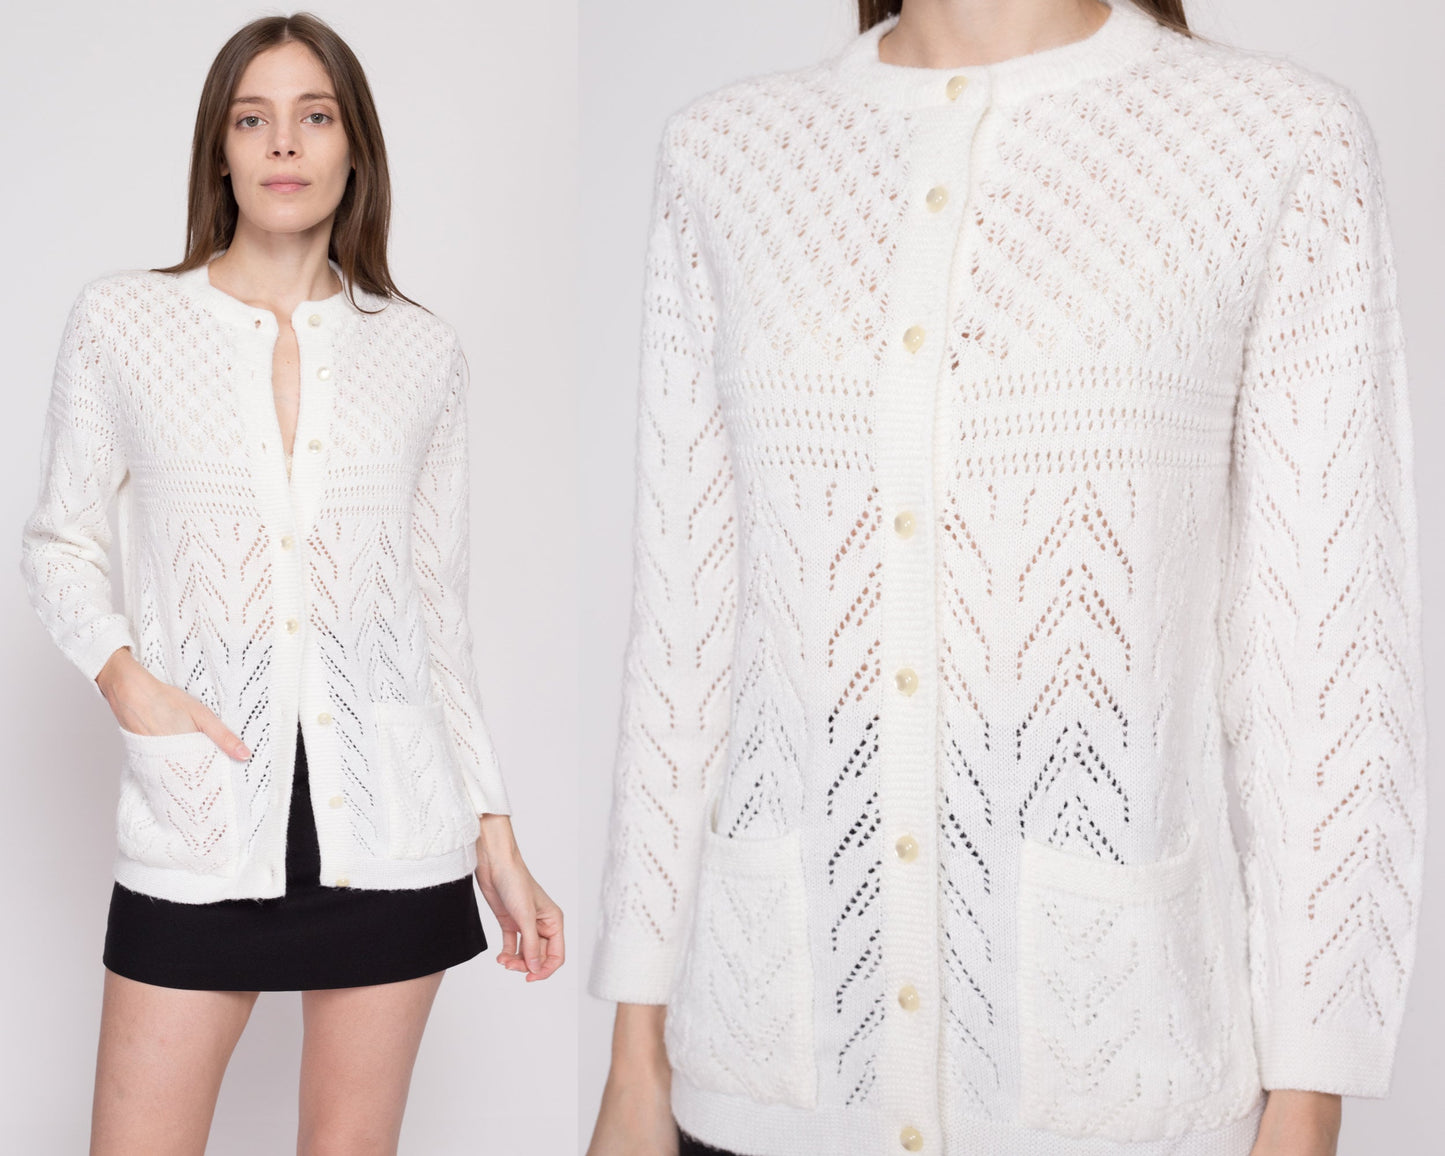 S| 70s White Eyelet Knit Cardigan - Small | Vintage Boho Button Up Sweater